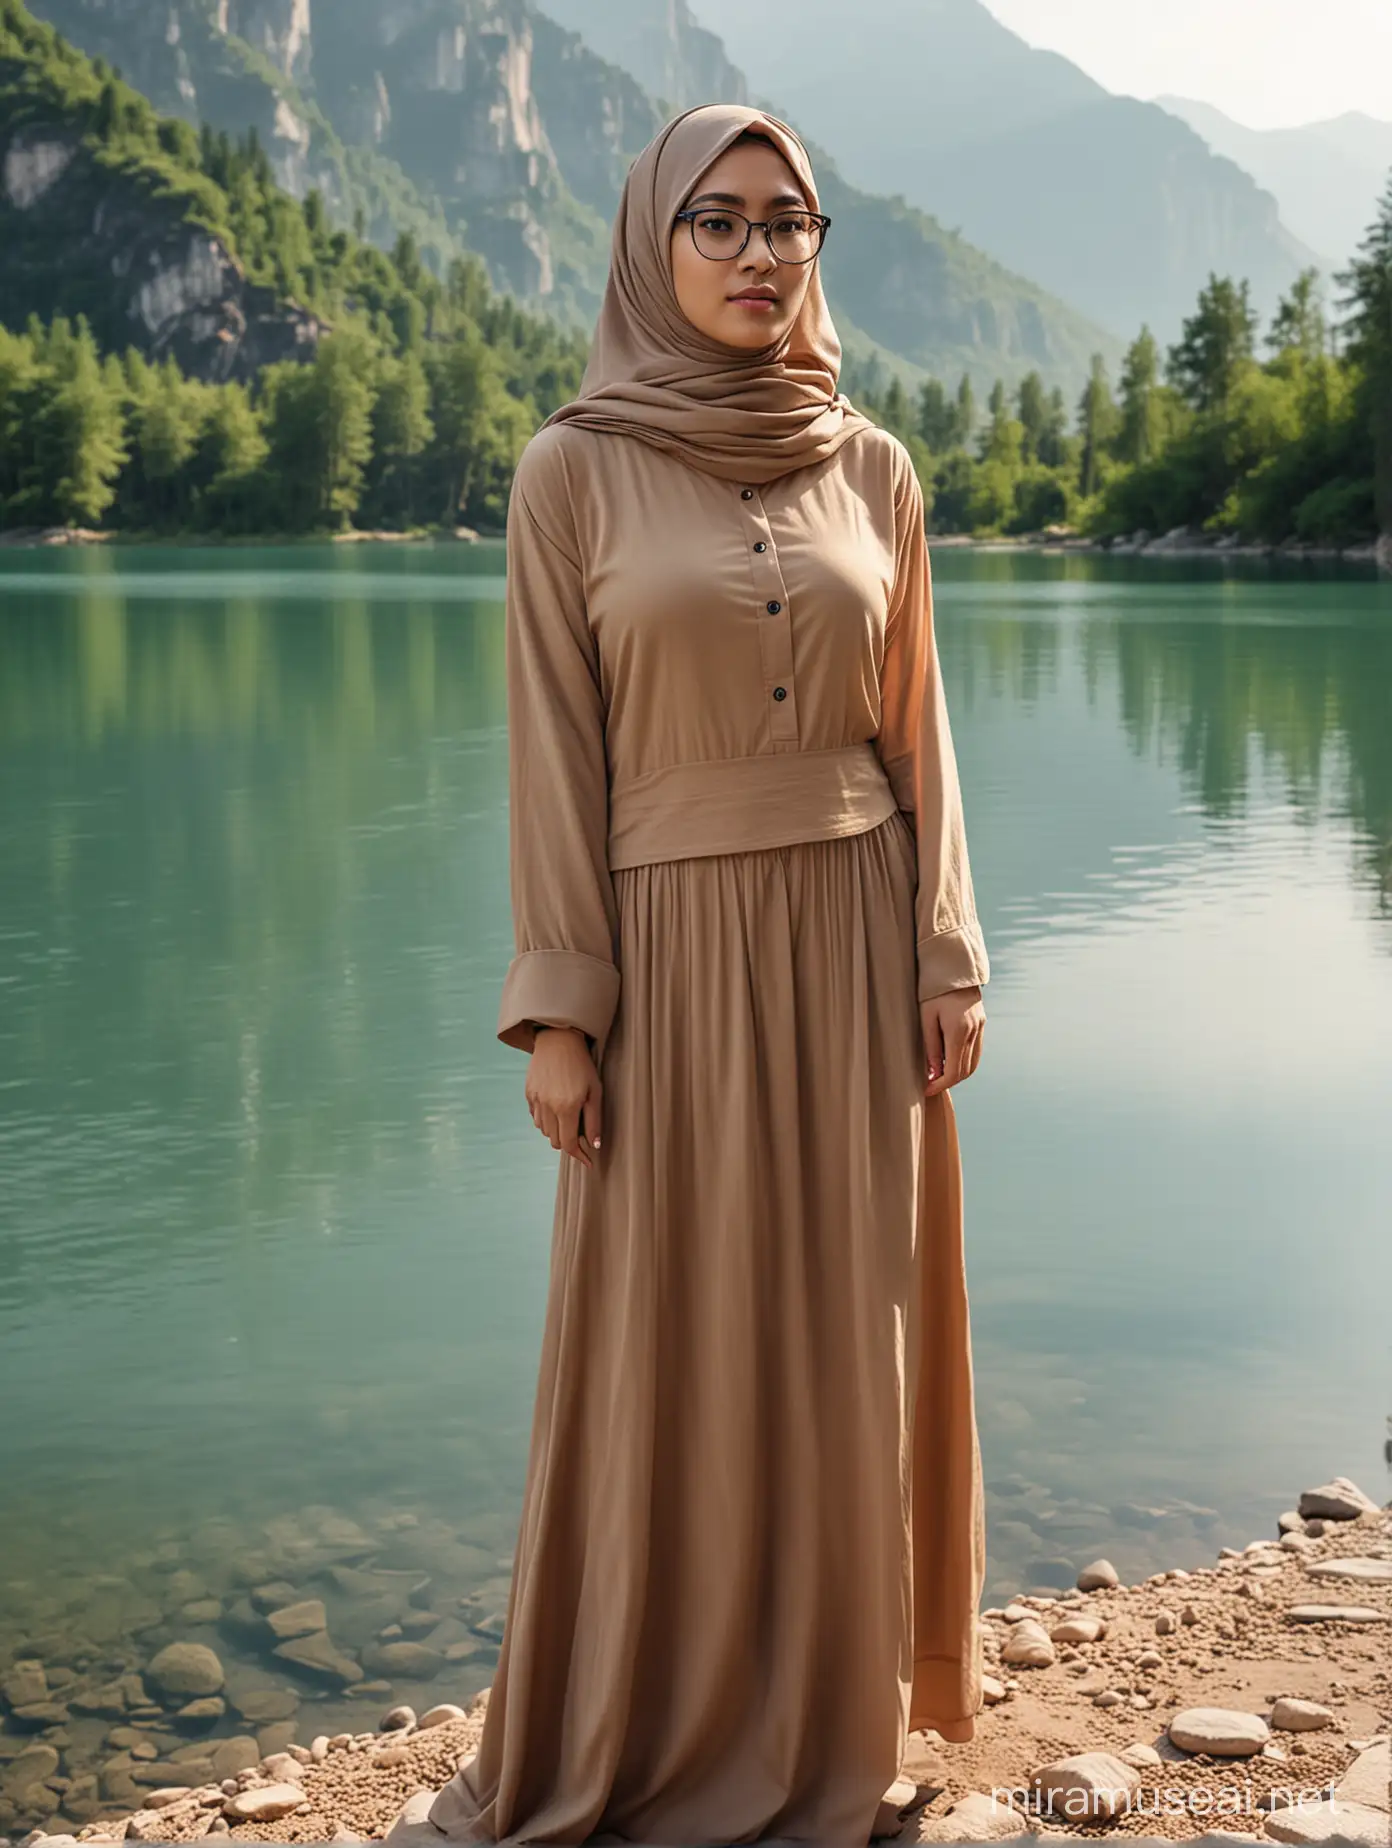 Asian Woman in Hijab Standing by Serene Lake in Ultra HD Photograph